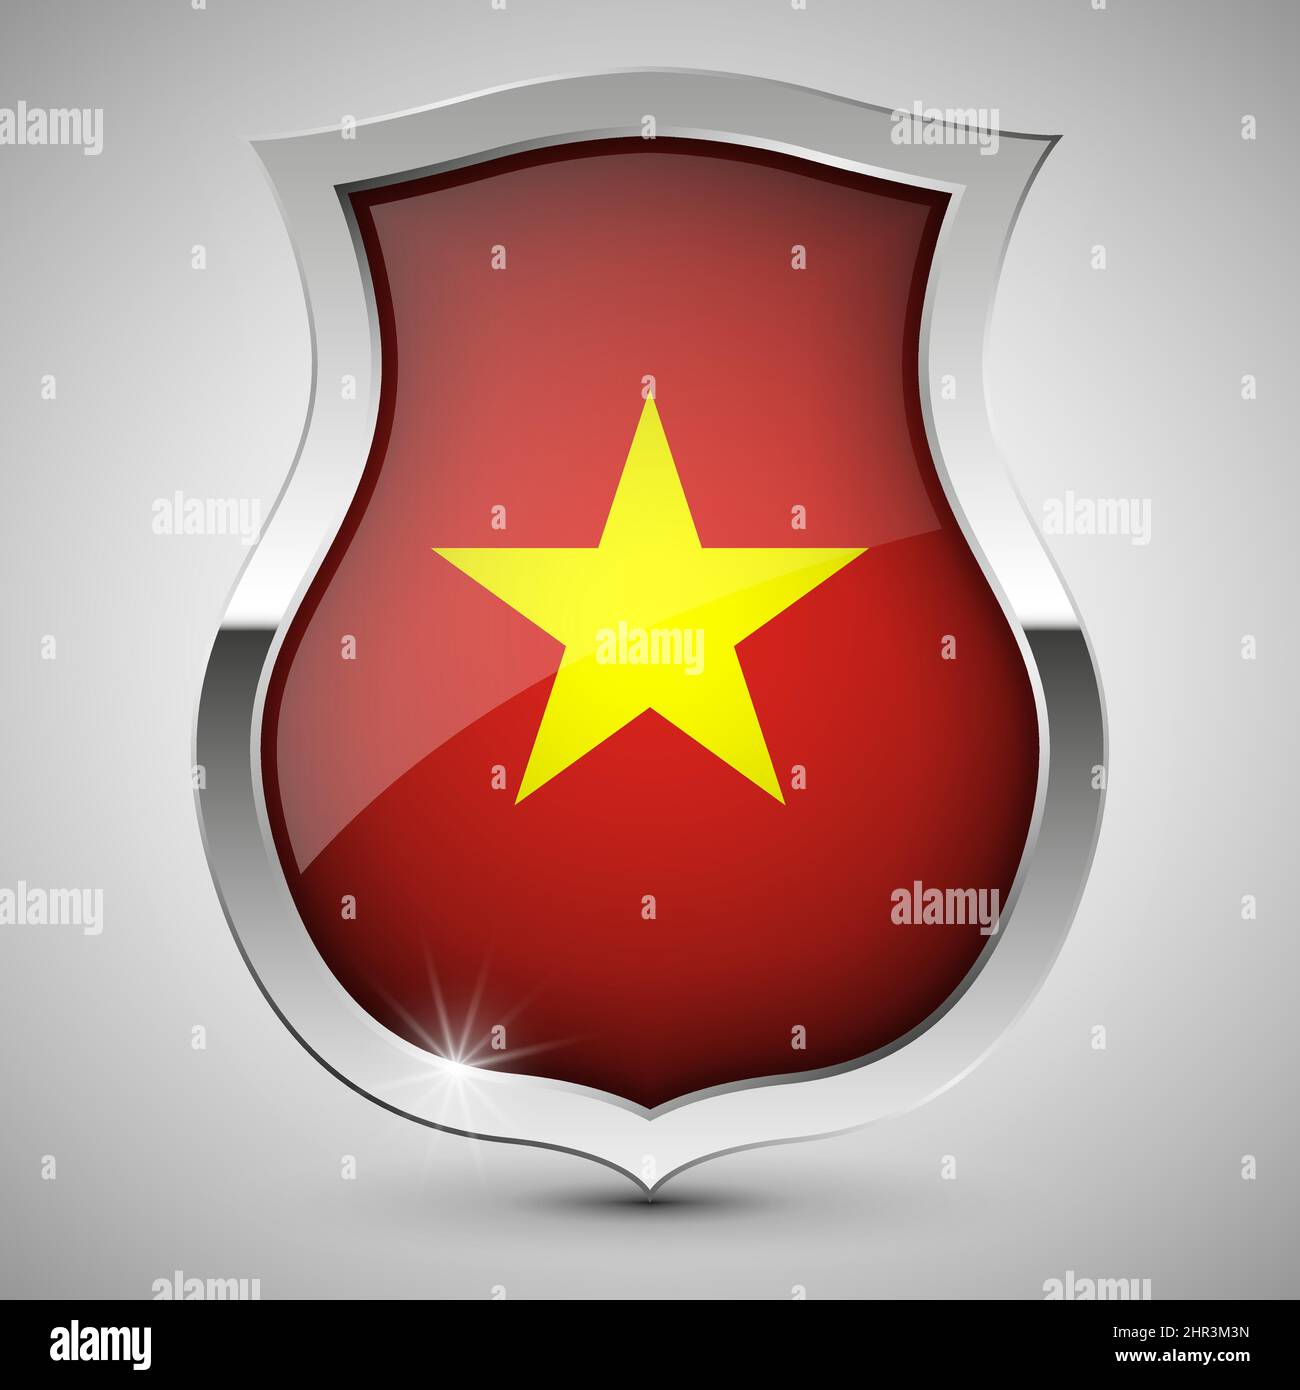 EPS10 Vector Patriotic shield with flag of Vietnam. An element of impact for the use you want to make of it. Stock Vector